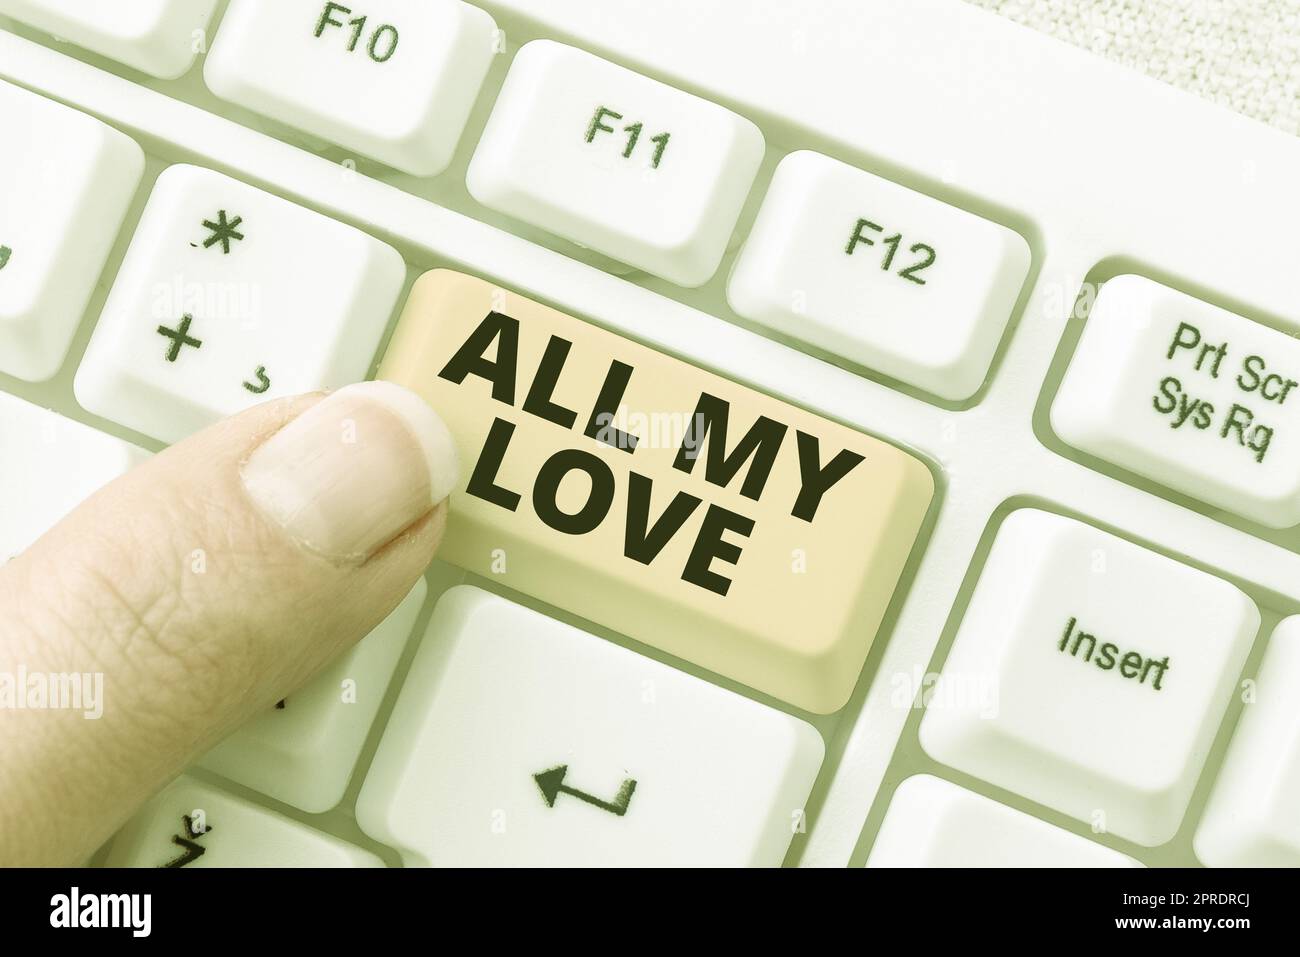 Writing displaying text All My Love. Business idea The whole affection and good feeling for you Romance happiness -48787 Stock Photo